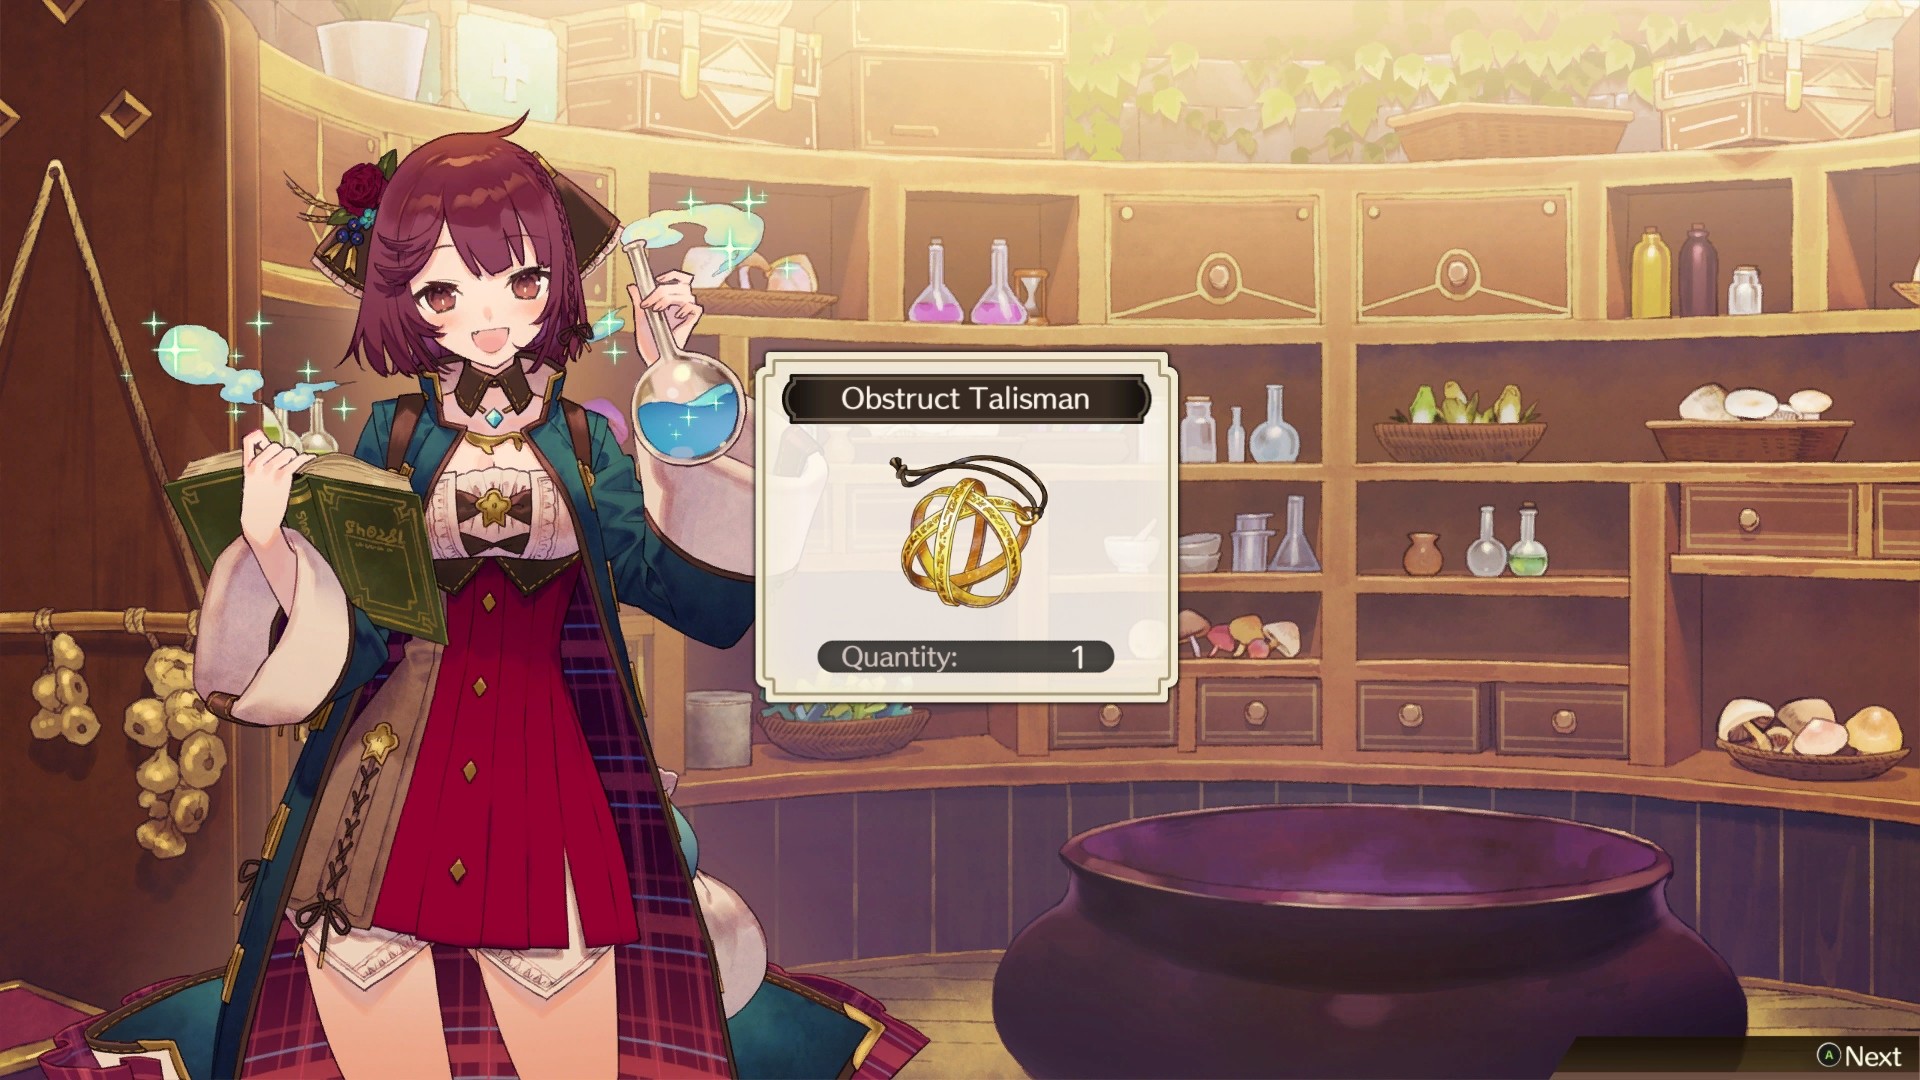 Atelier Sophie 2 - Recipe Expansion Pack "The Art of Battle" Featured Screenshot #1